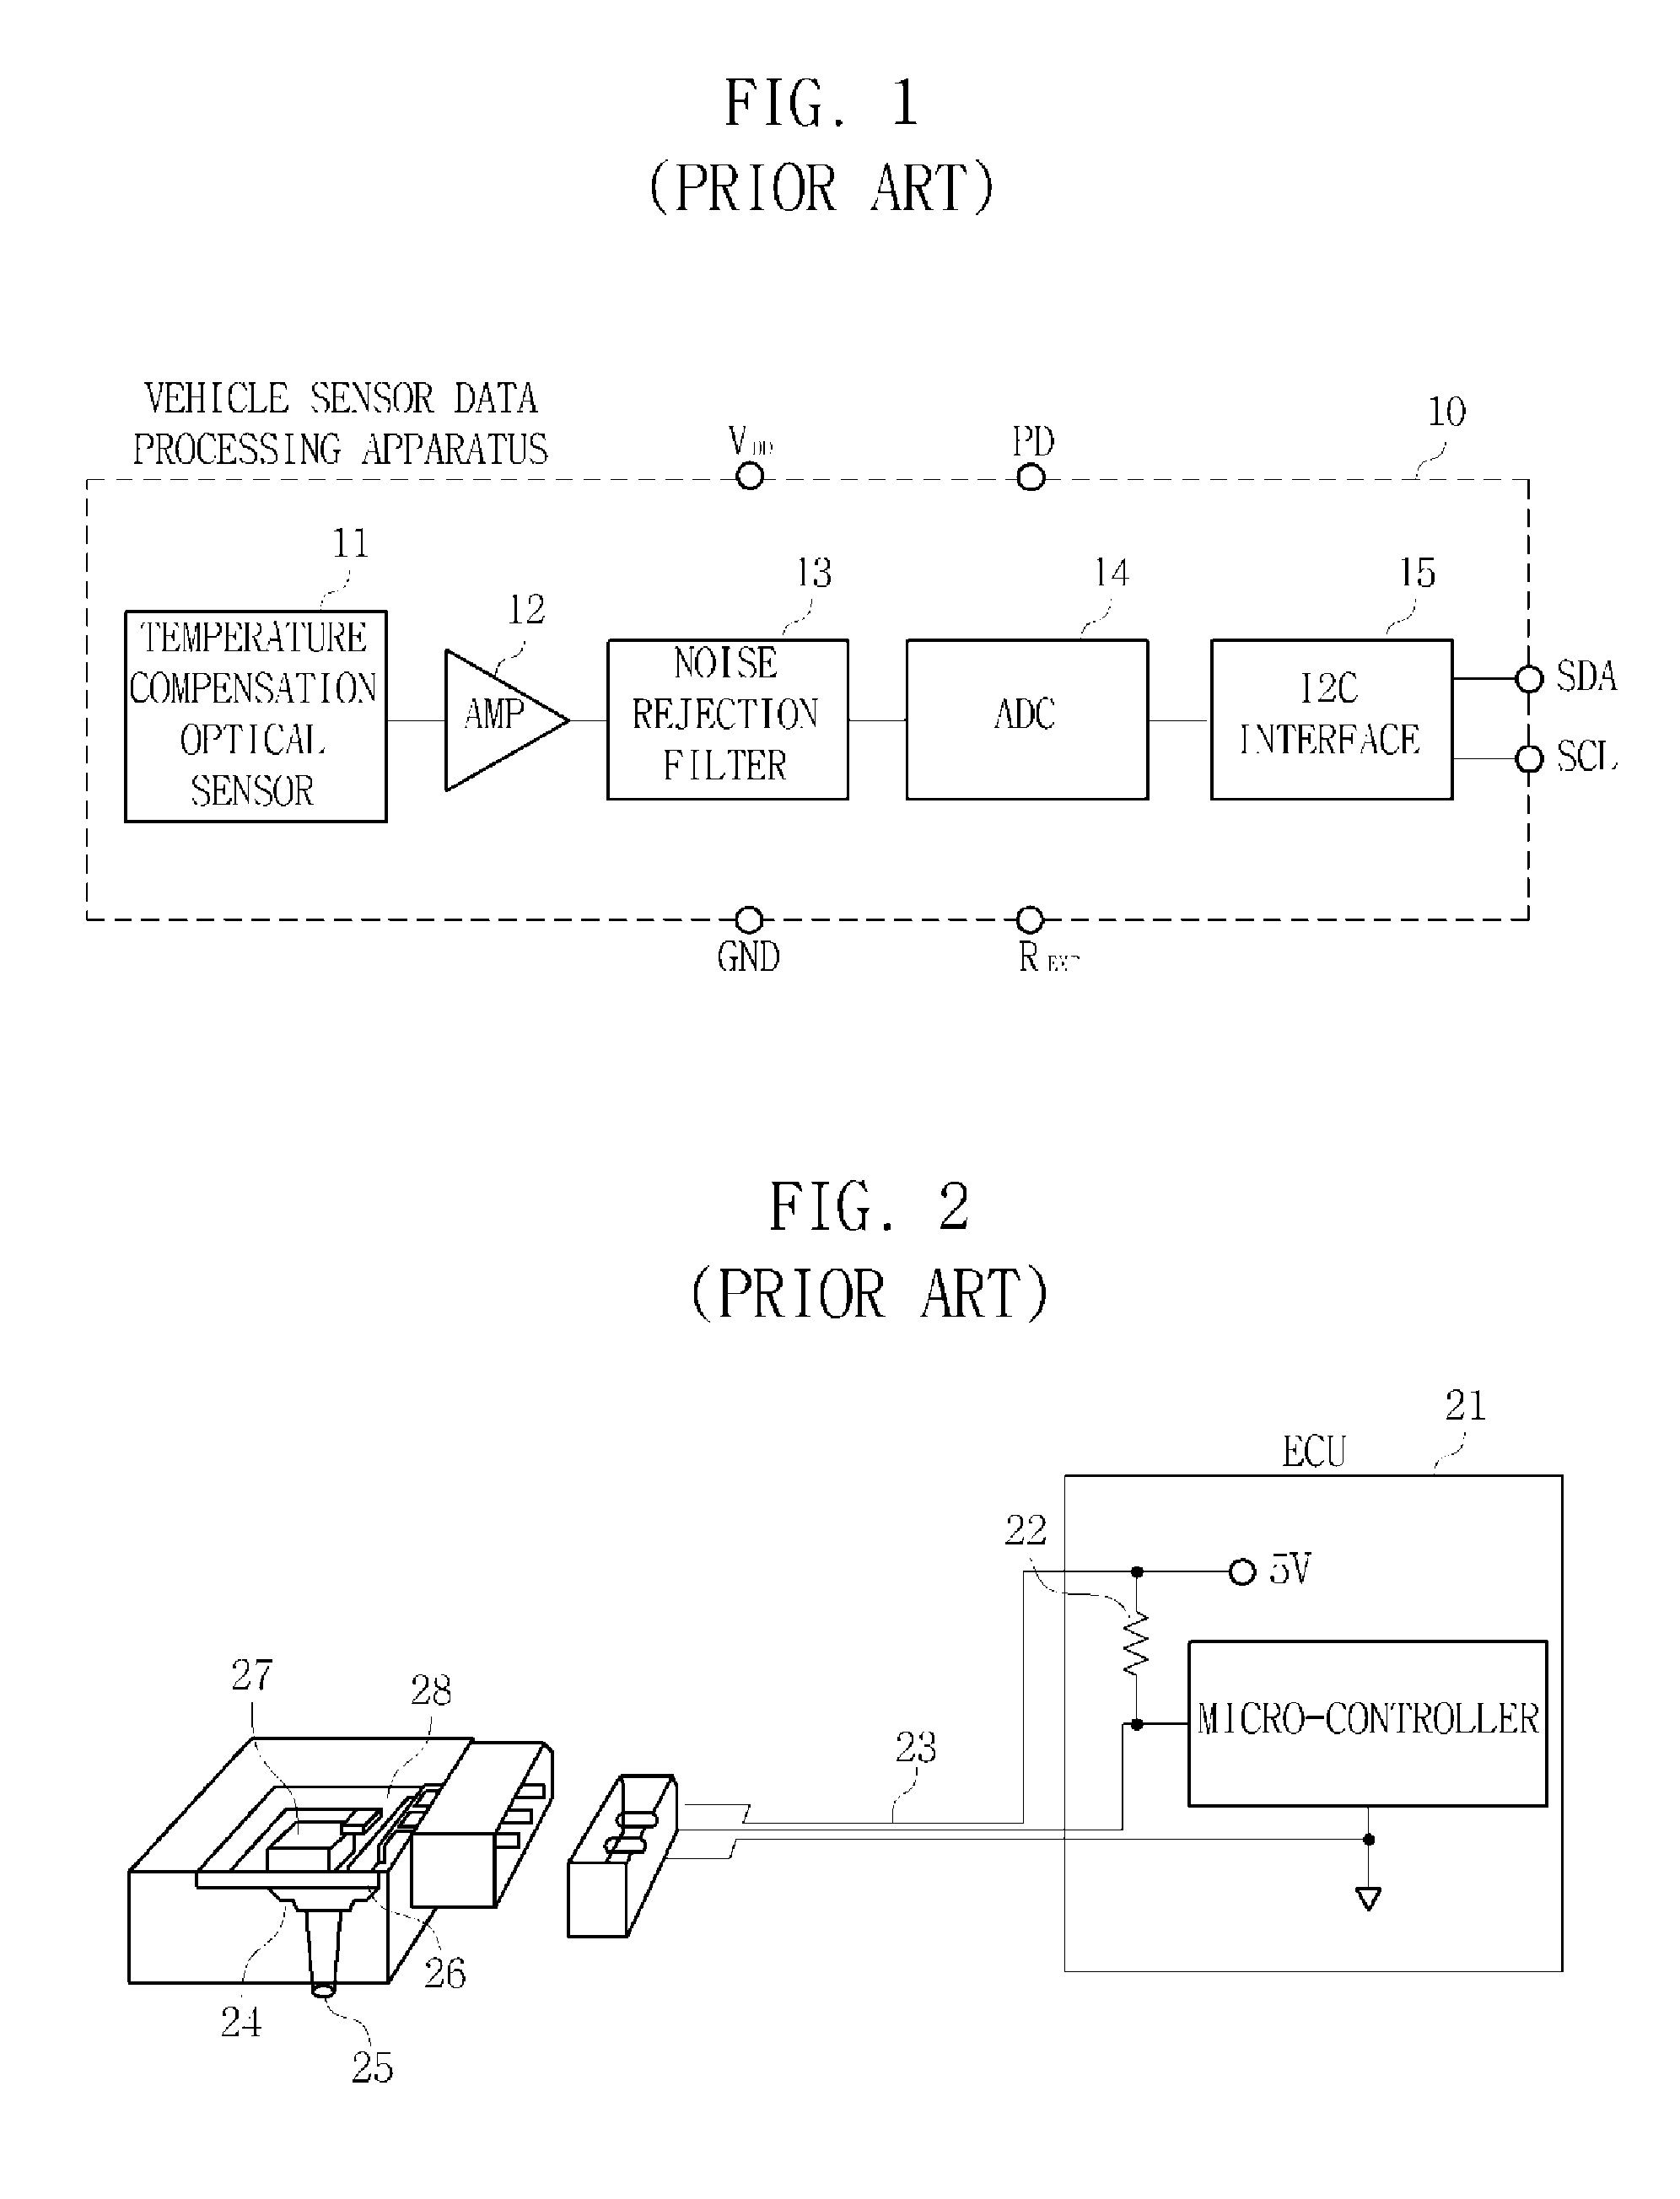 Apparatus and method for processing sensor data for vehicle using extensible markup language